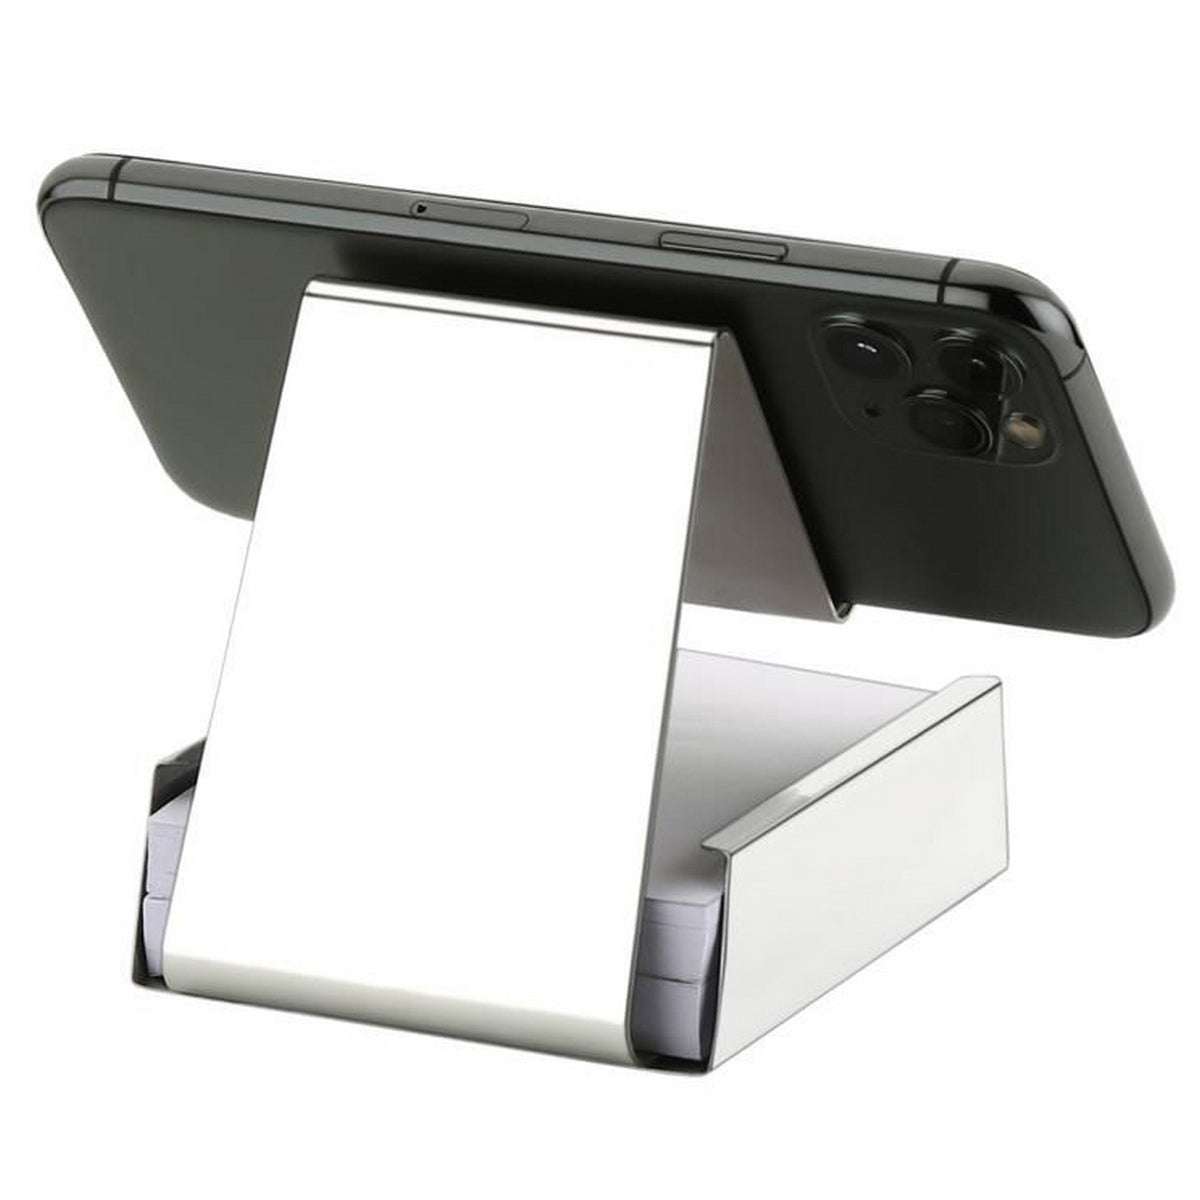 Silver Metal Mirror Finish Universal Mobile Phone Holder Stand with Writing Pad - For Personal, Corporate Gifting, Return Gift, Event Gifting, Promotional Freebies